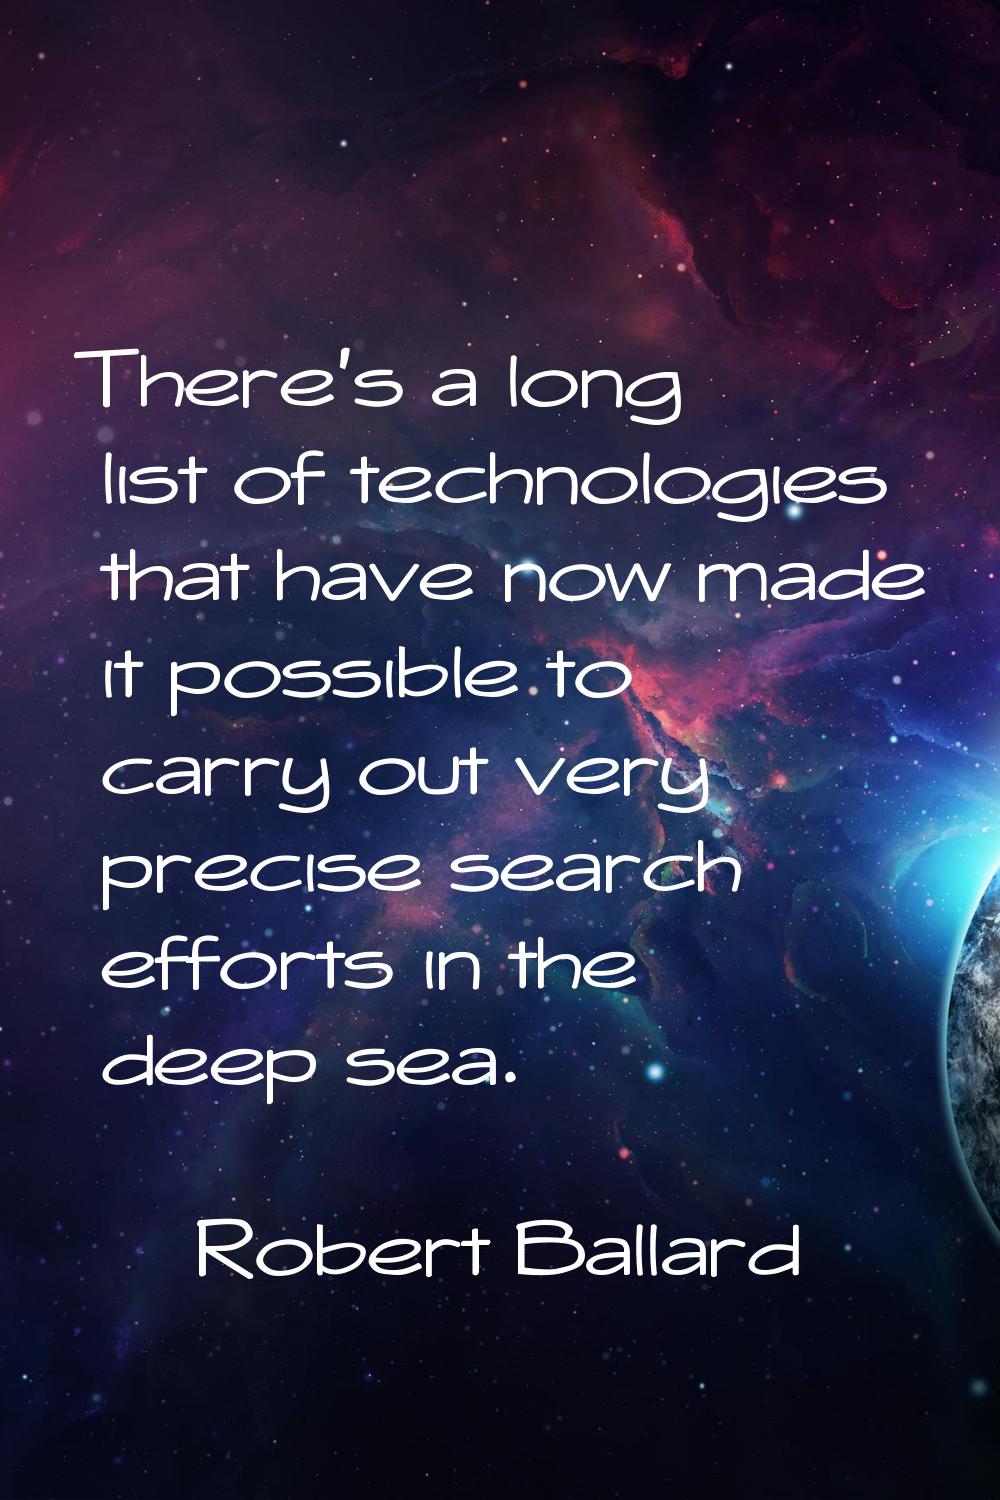 There's a long list of technologies that have now made it possible to carry out very precise search